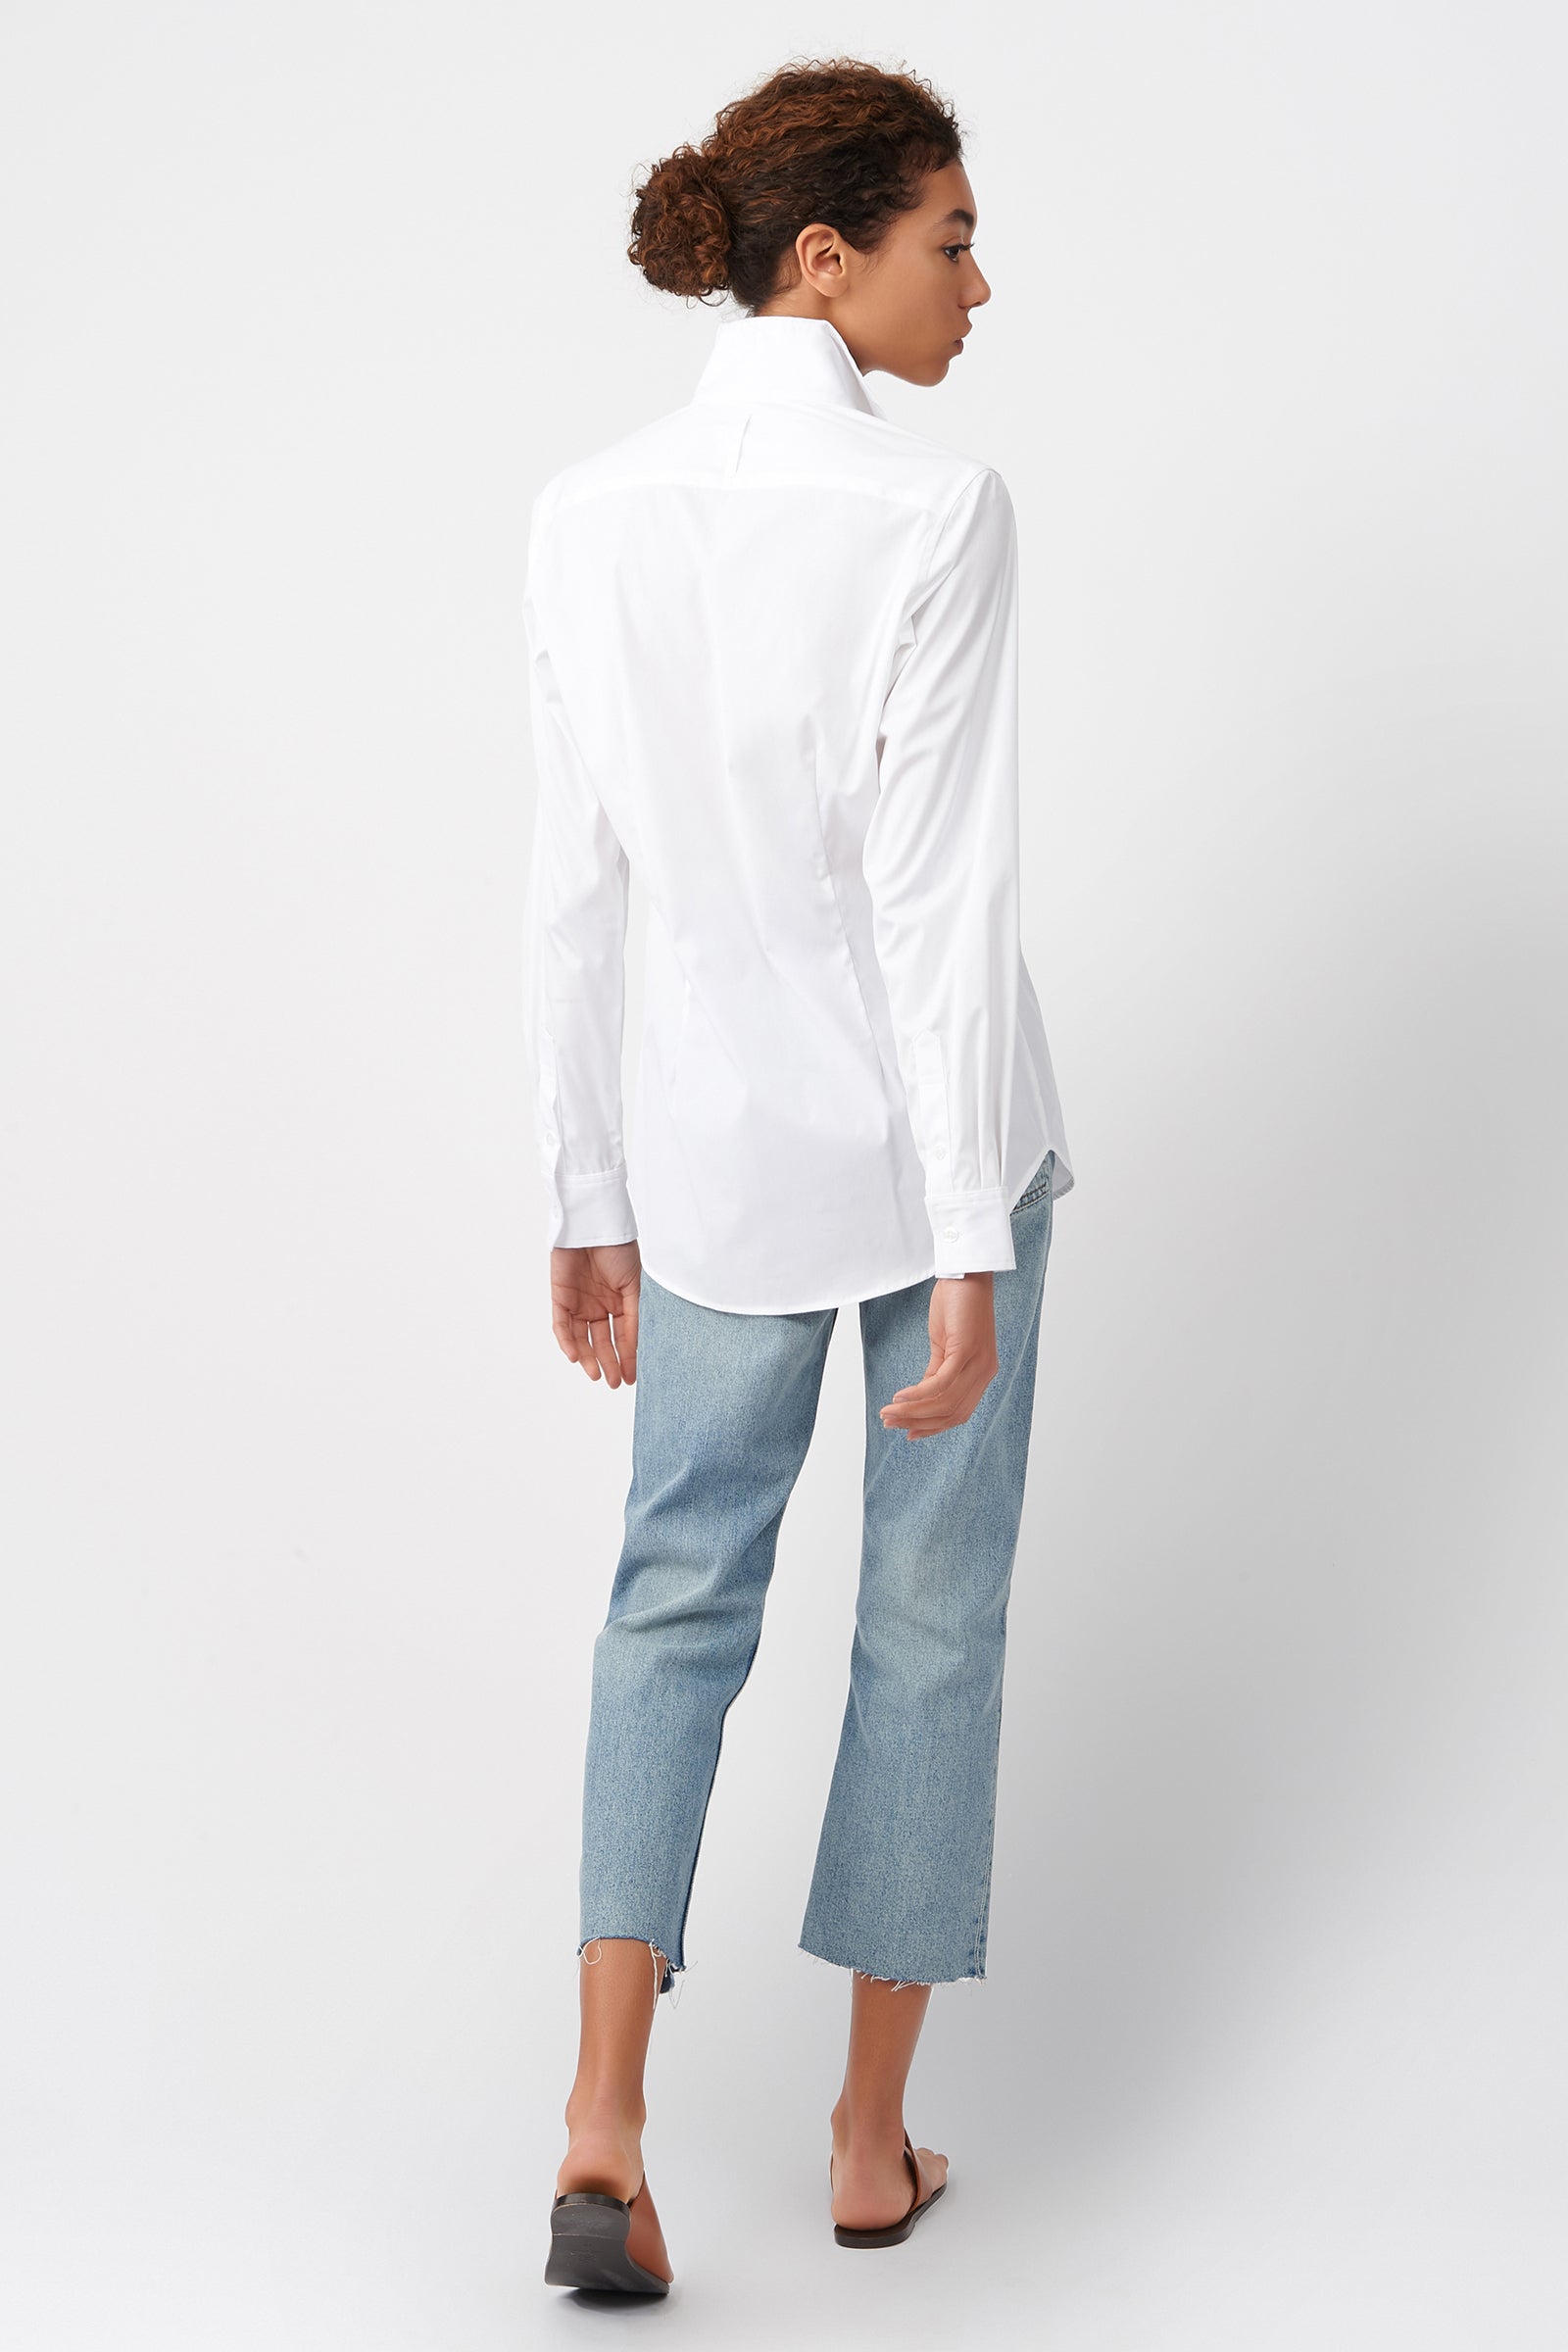 Kal Rieman Double Collar Shirt in White Cotton on Model Back View